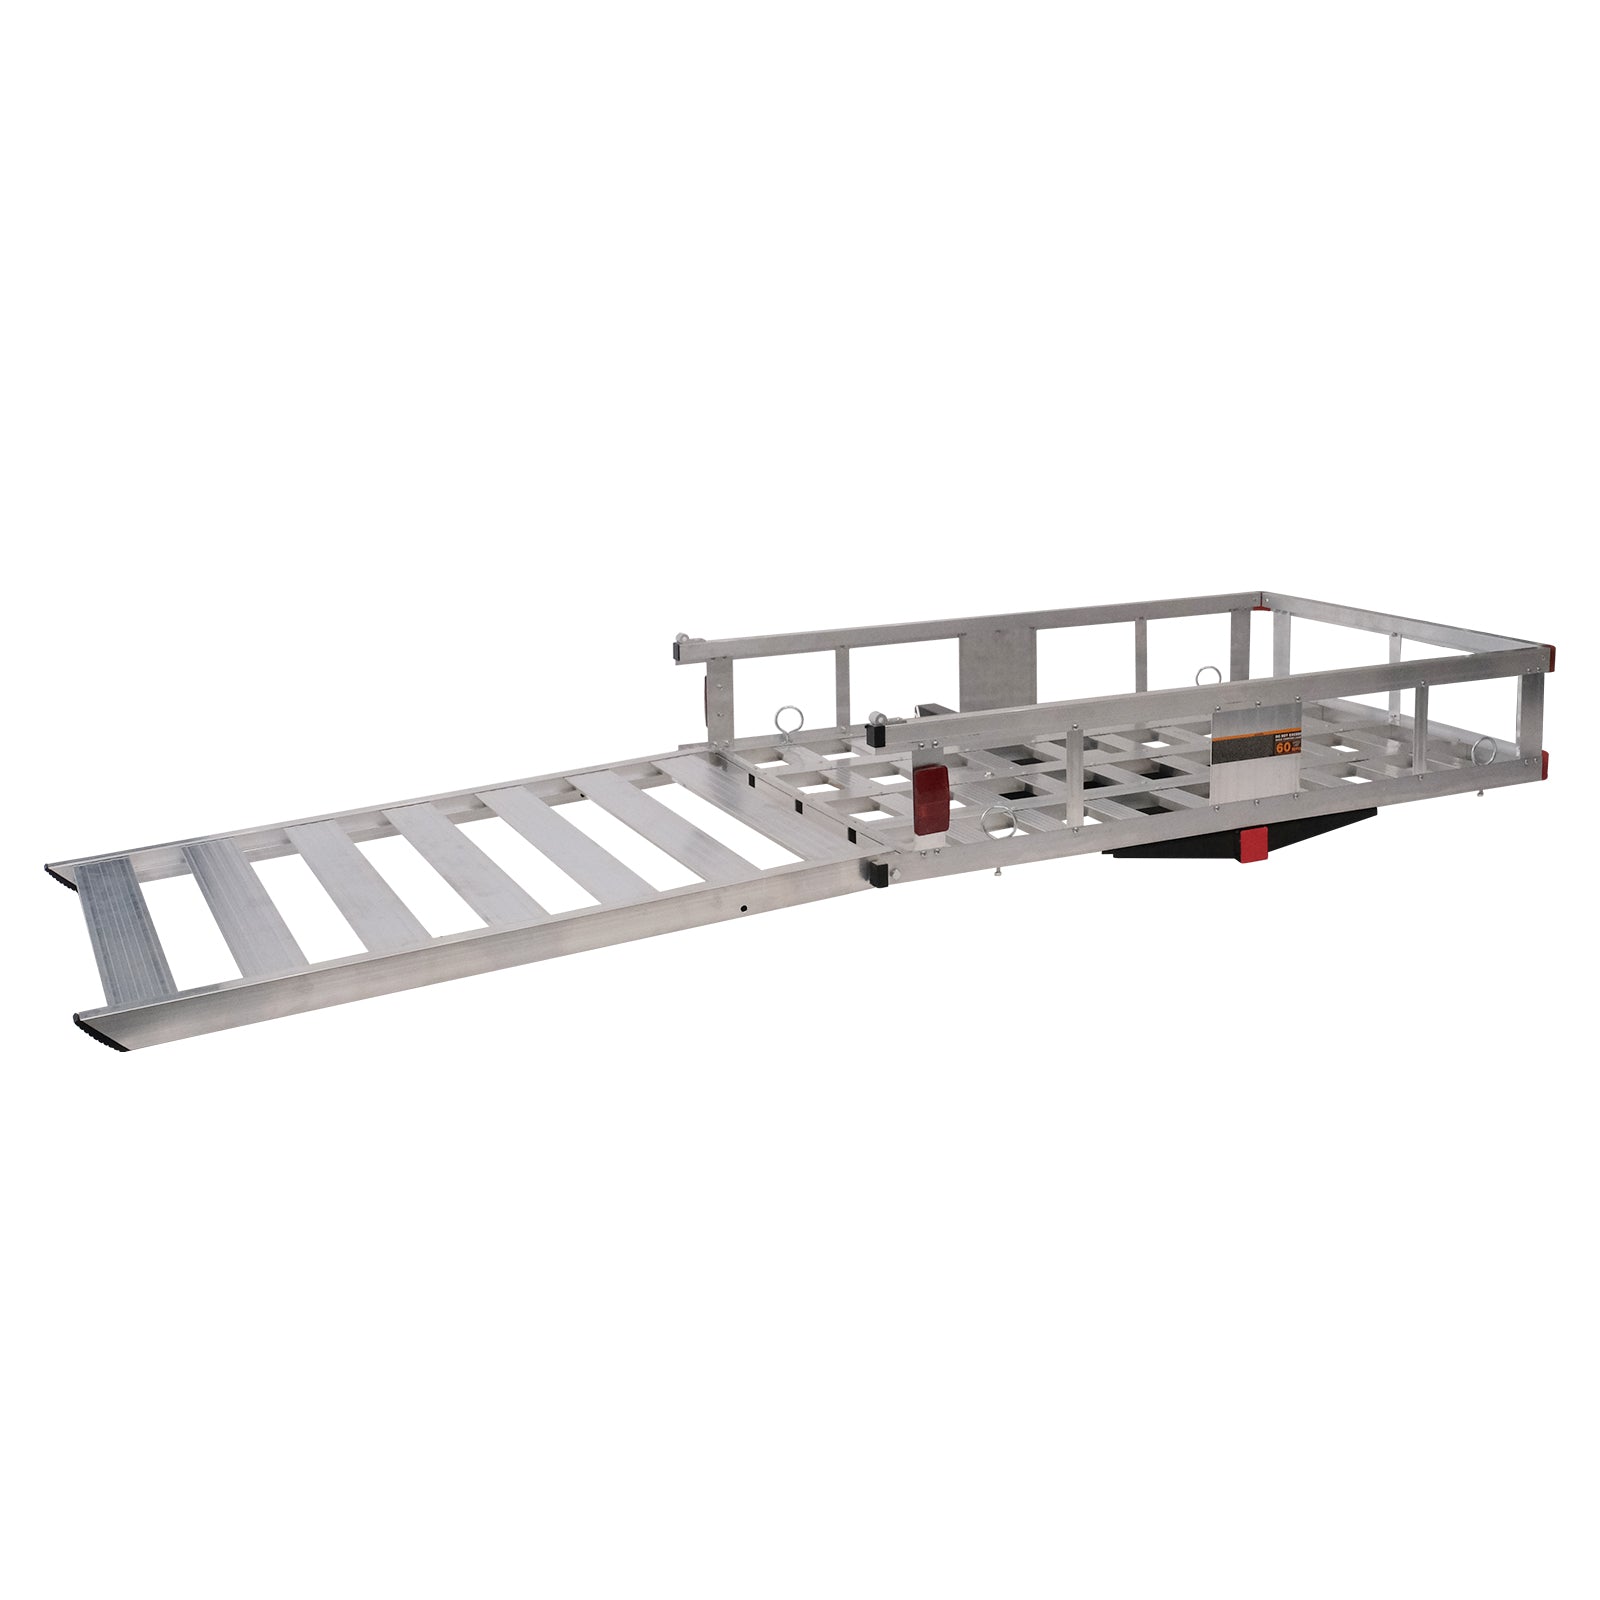 50"x 29.7" Hitch Mount Cargo Carrier Trailer Aluminum Utility Basket with 41.5" Folding Wheelchair Ramp, Silver